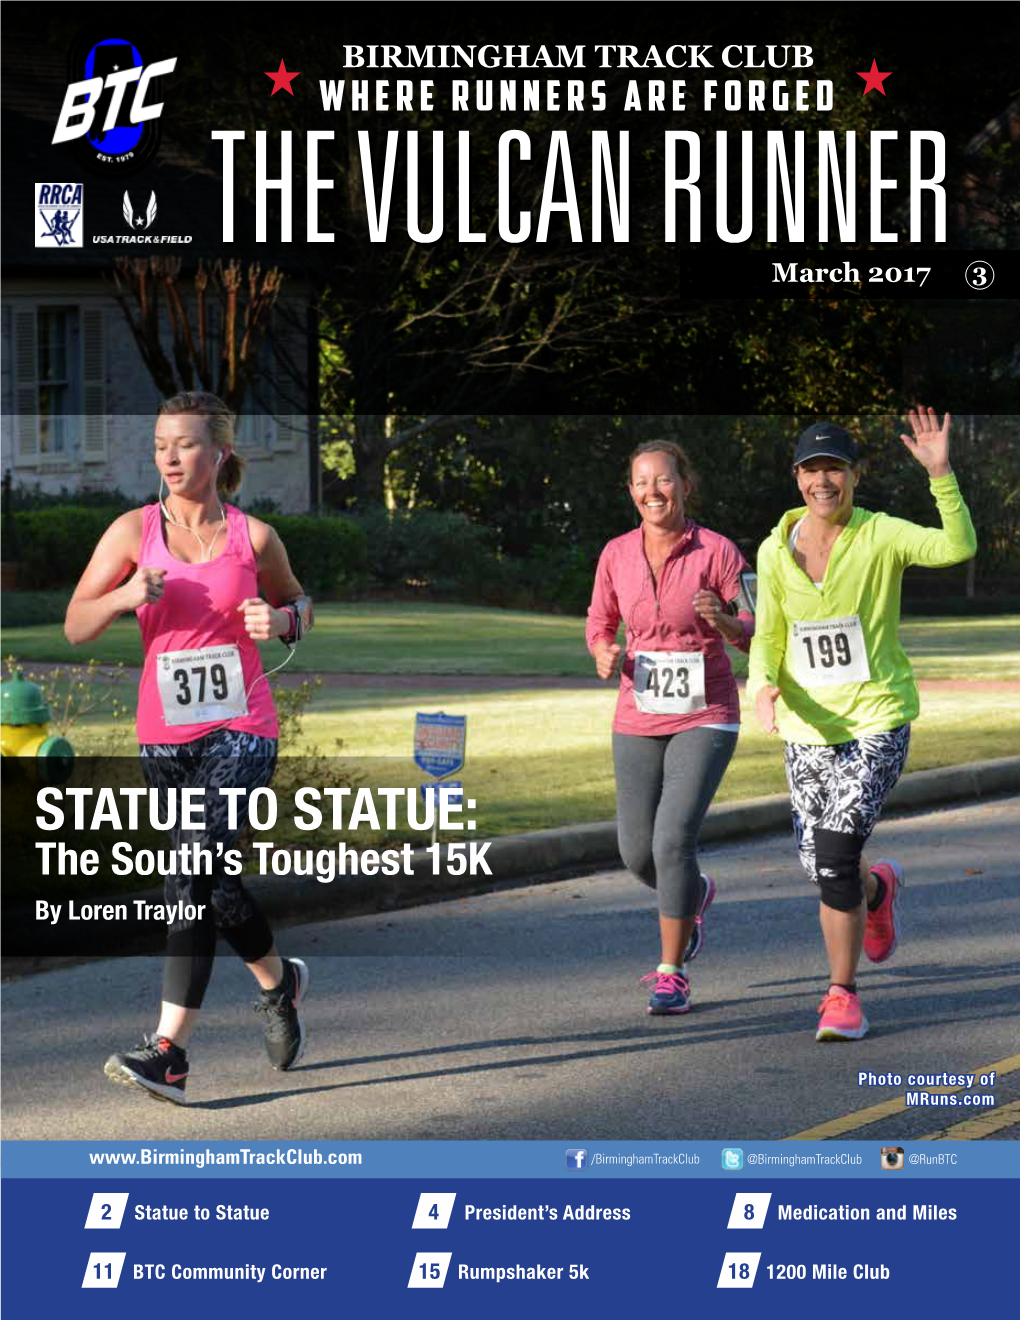 STATUE to STATUE: the South’S Toughest 15K by Loren Traylor